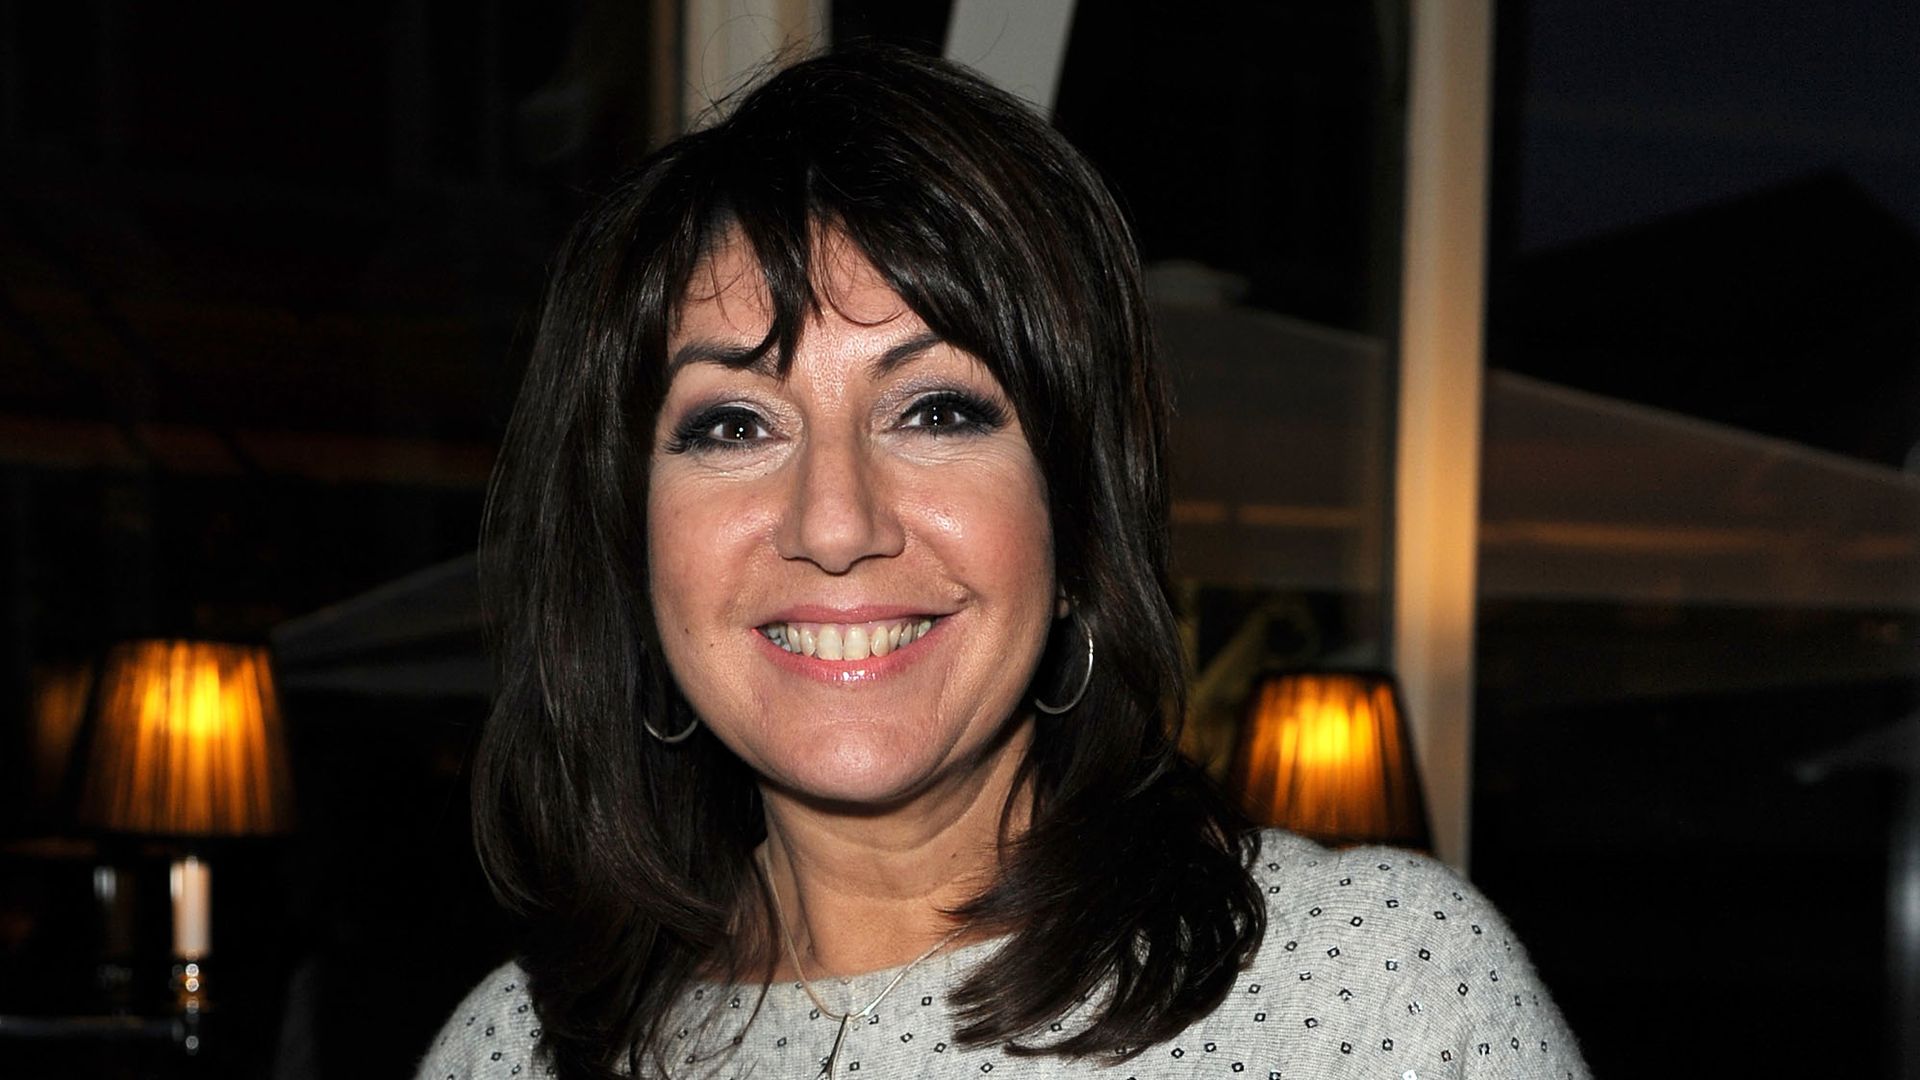 Jane McDonald in a white dress holding a glass of champagne